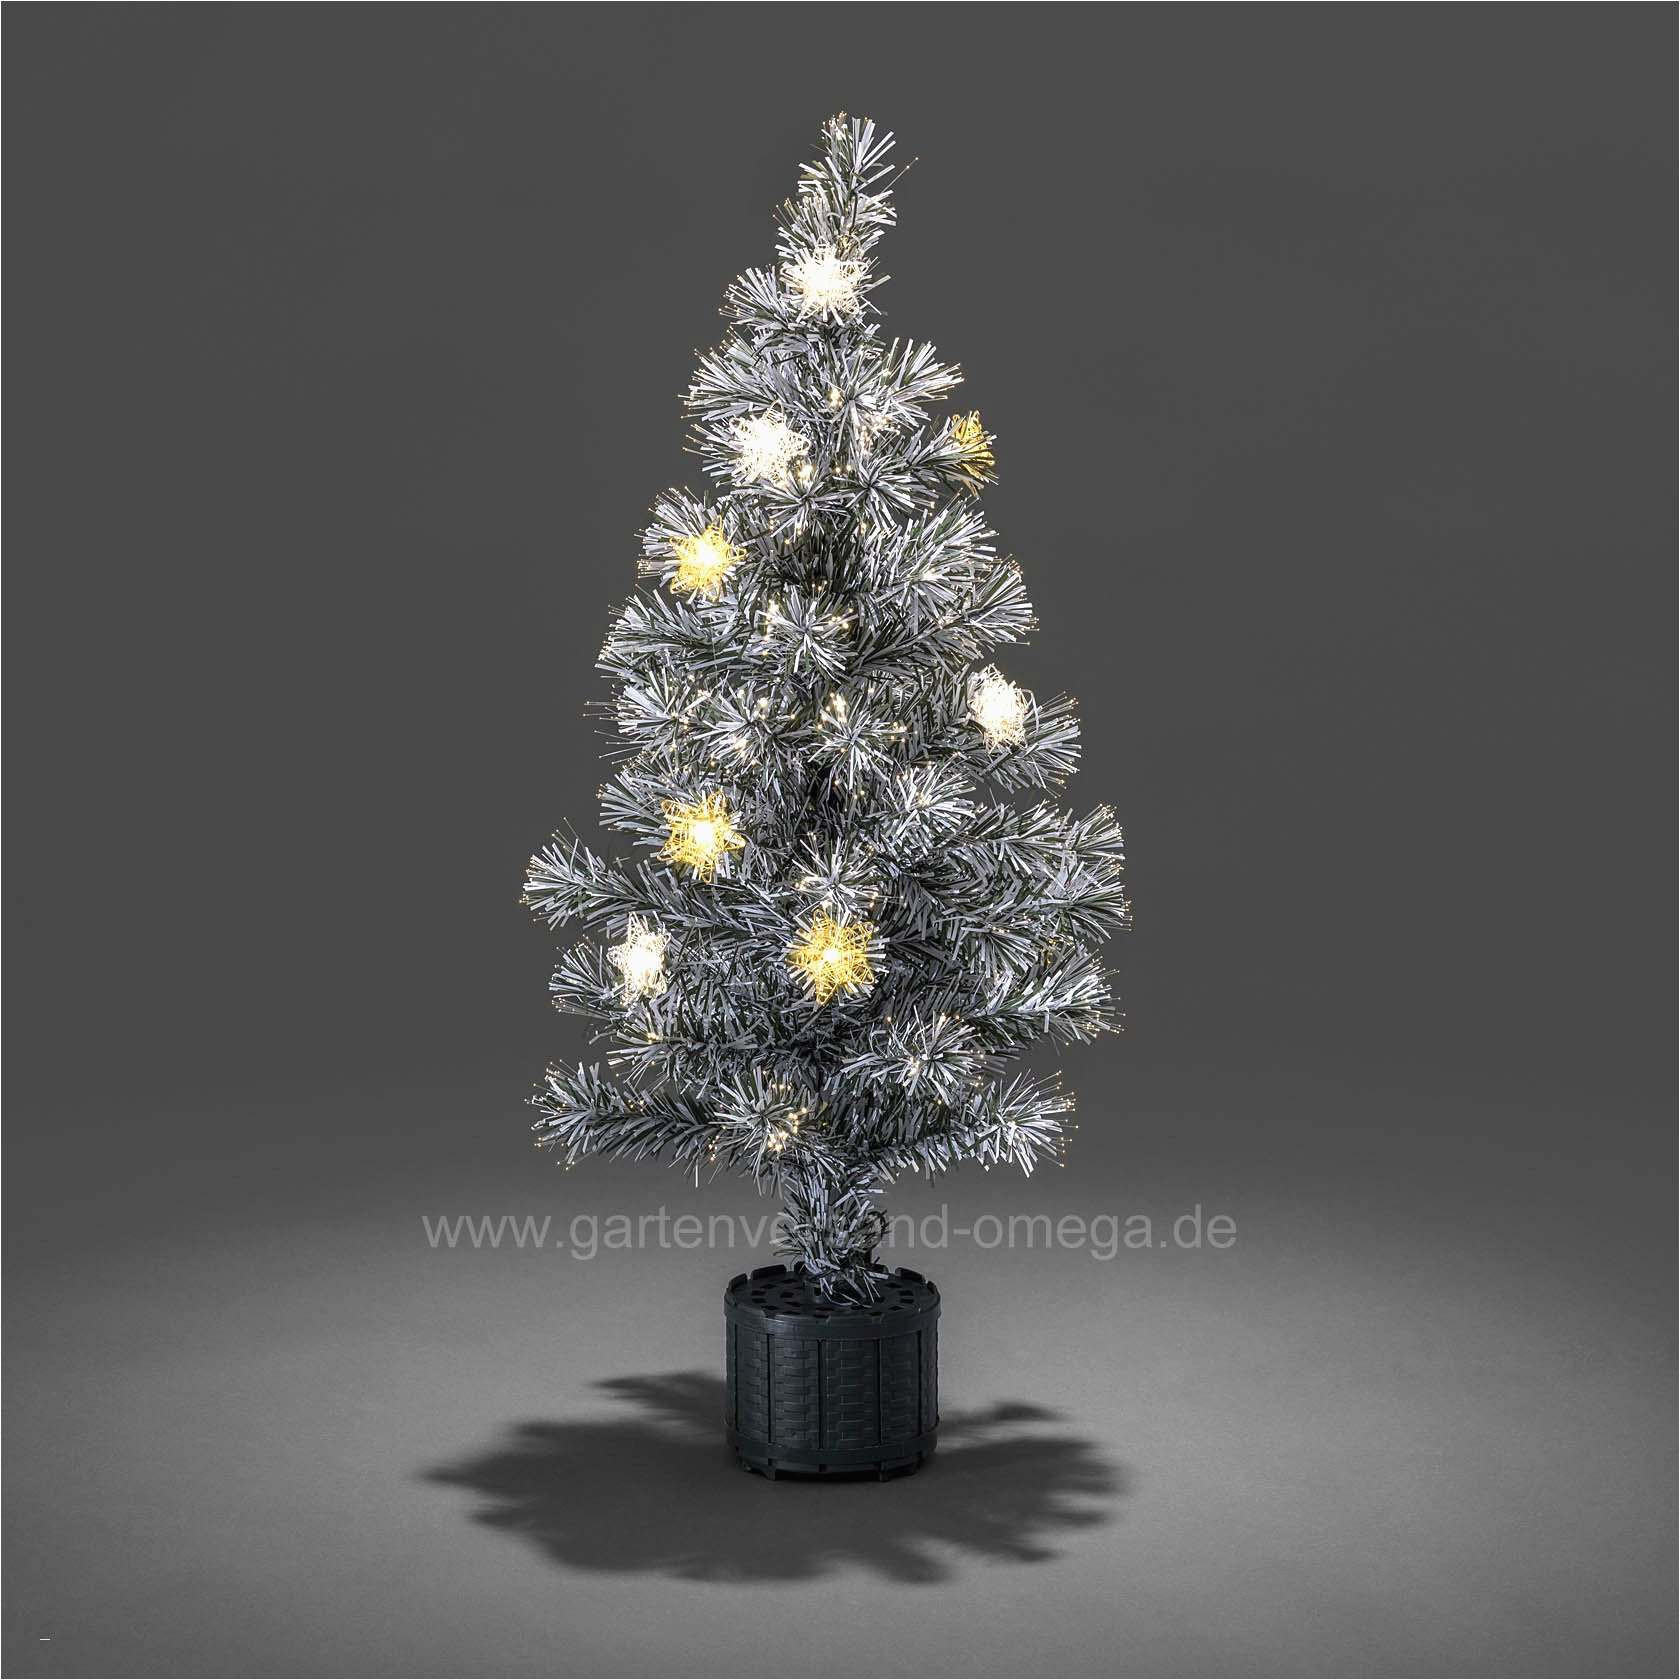 19 Lovable Tree Branch Vase 2022 free download tree branch vase of 30 awesome outdoor tree decorating ideas best christmas throughout new outdoor led lights for trees lovely outdoor christmas tree lights beautiful sehr gehend od inspirat